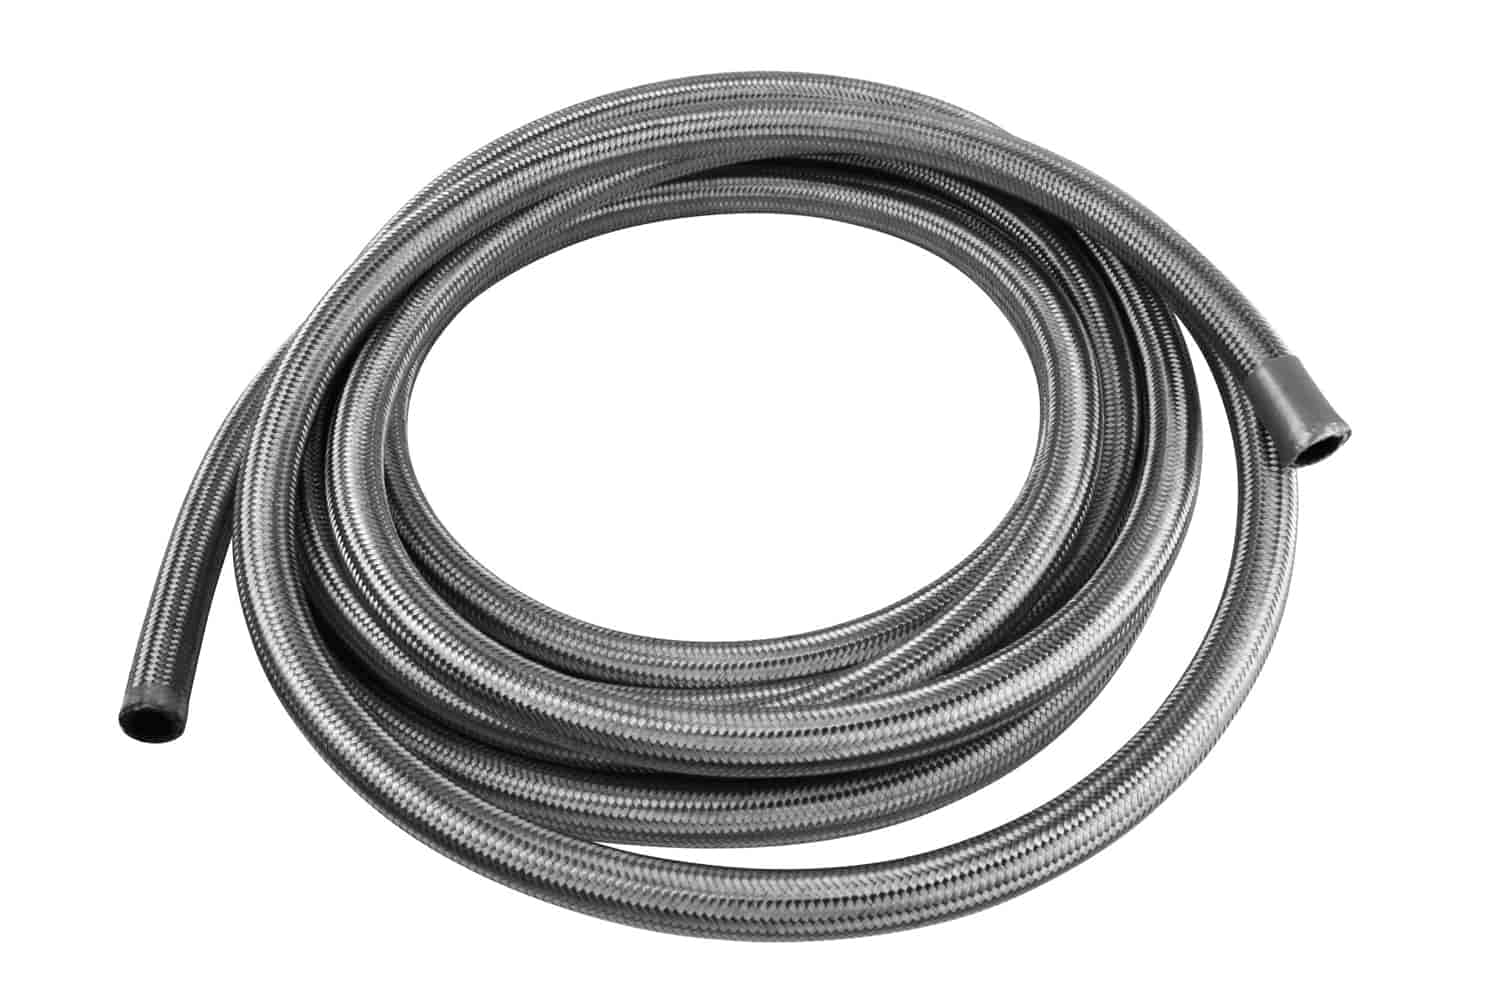 Braided Stainless Steel Fuel Hose -10AN x 20